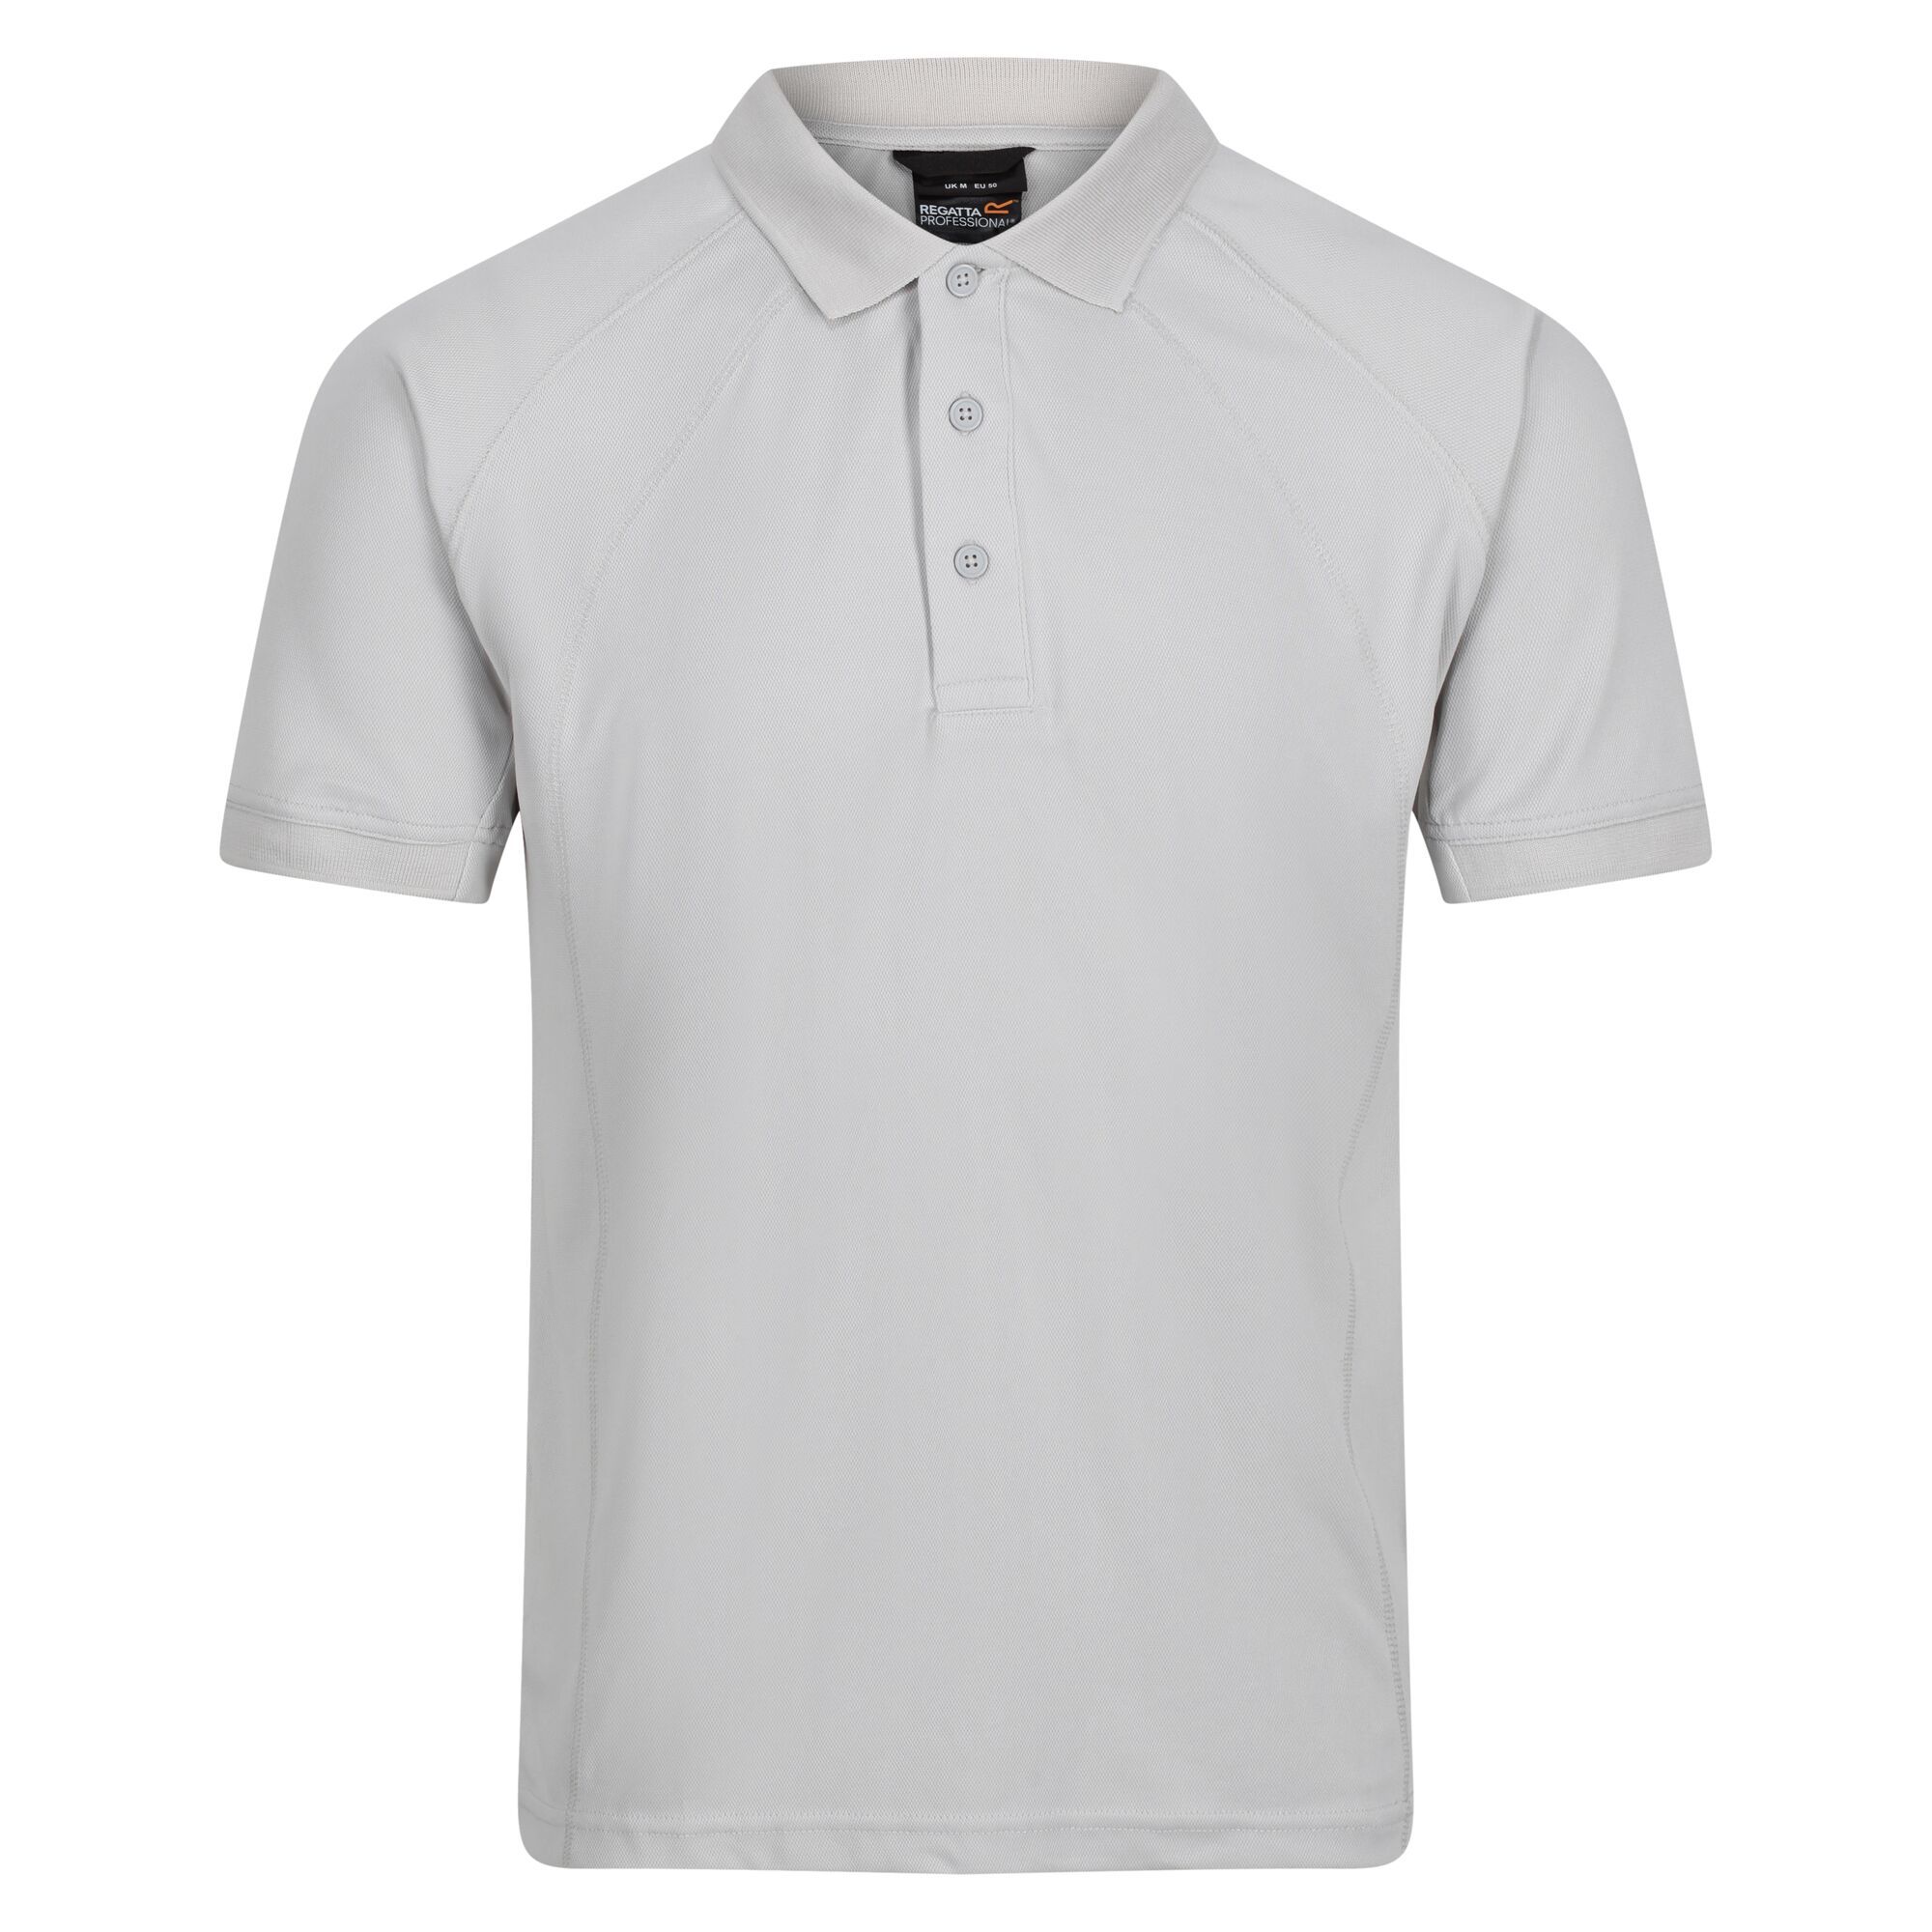 Men's Coolweave Wicking Polo Shirt Silver Grey